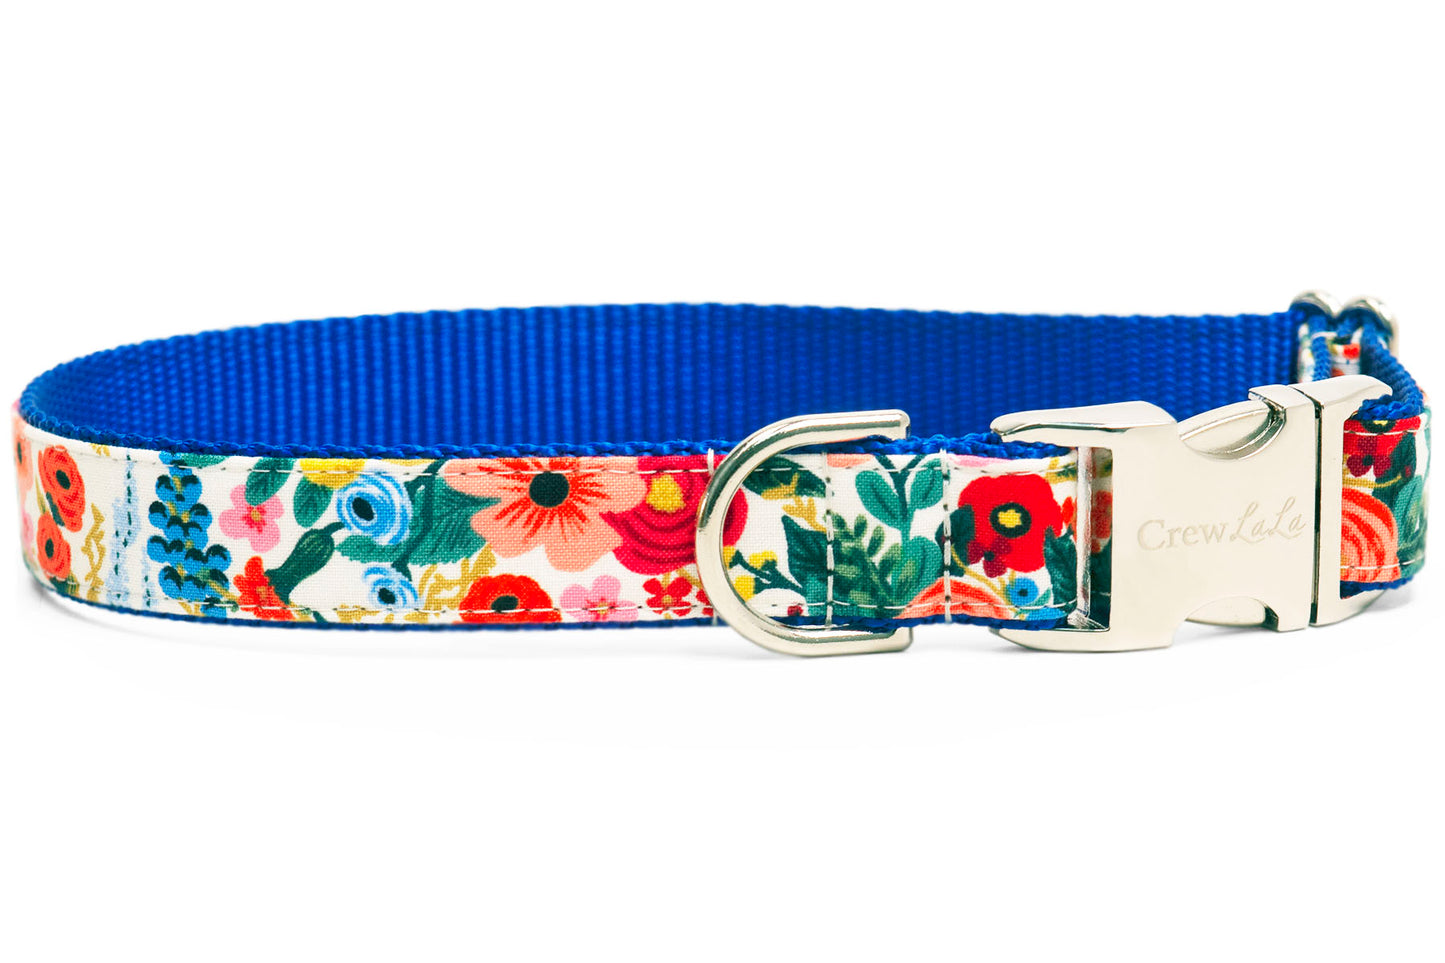 Blissful Blooms Dog Collar- Two Styles - Crew LaLa